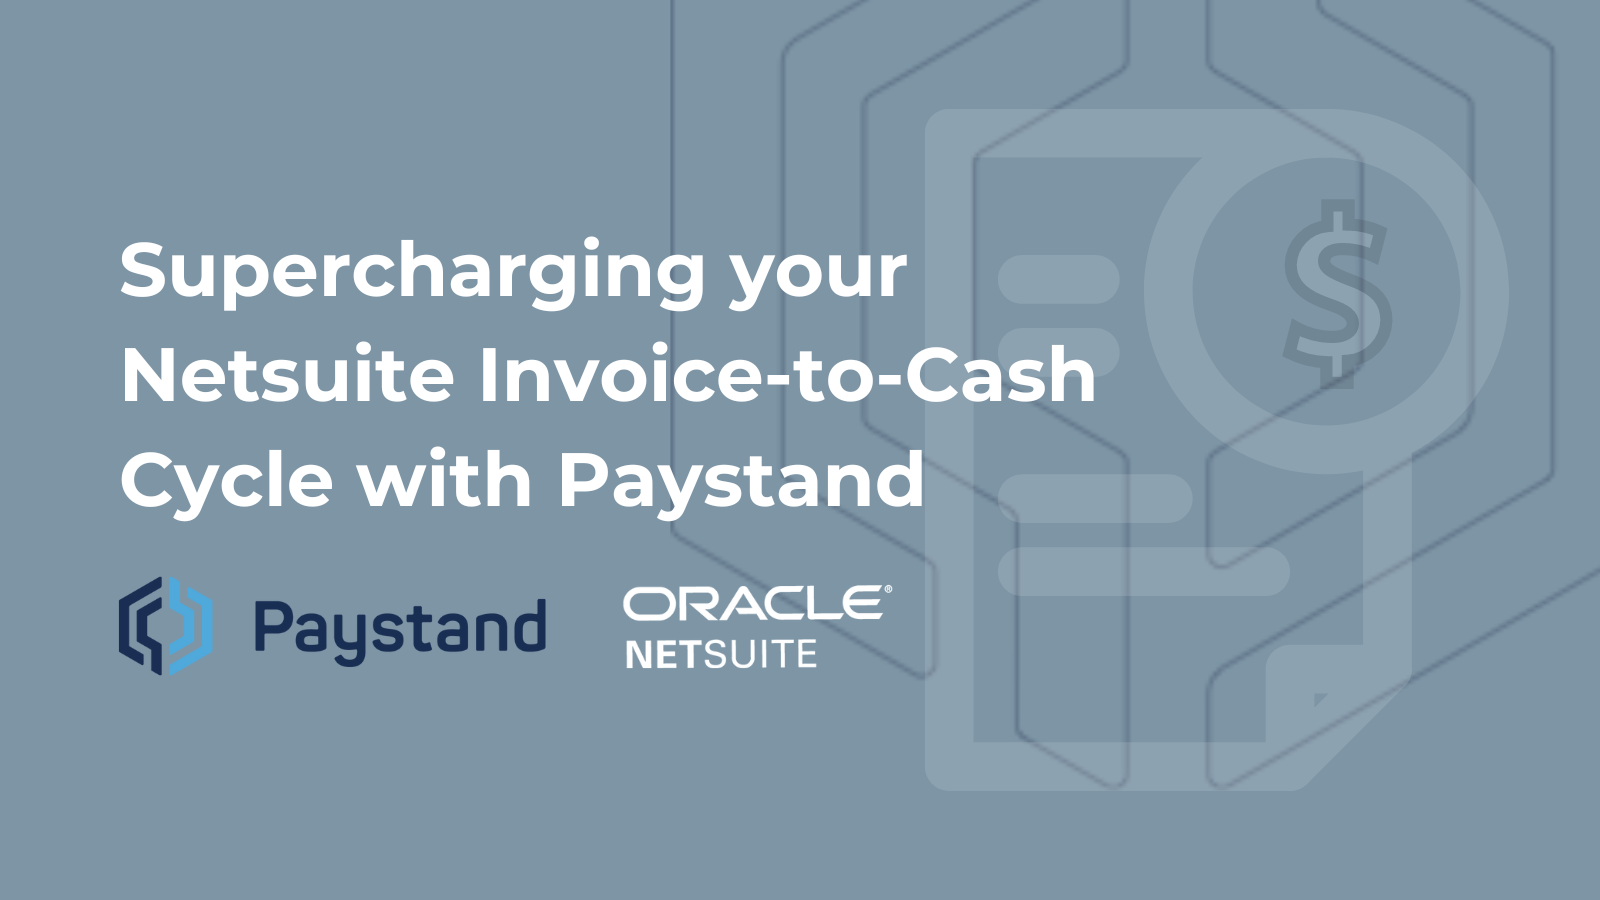 Supercharging your NetSuite Invoice-to-Cash Cycle with Paystand